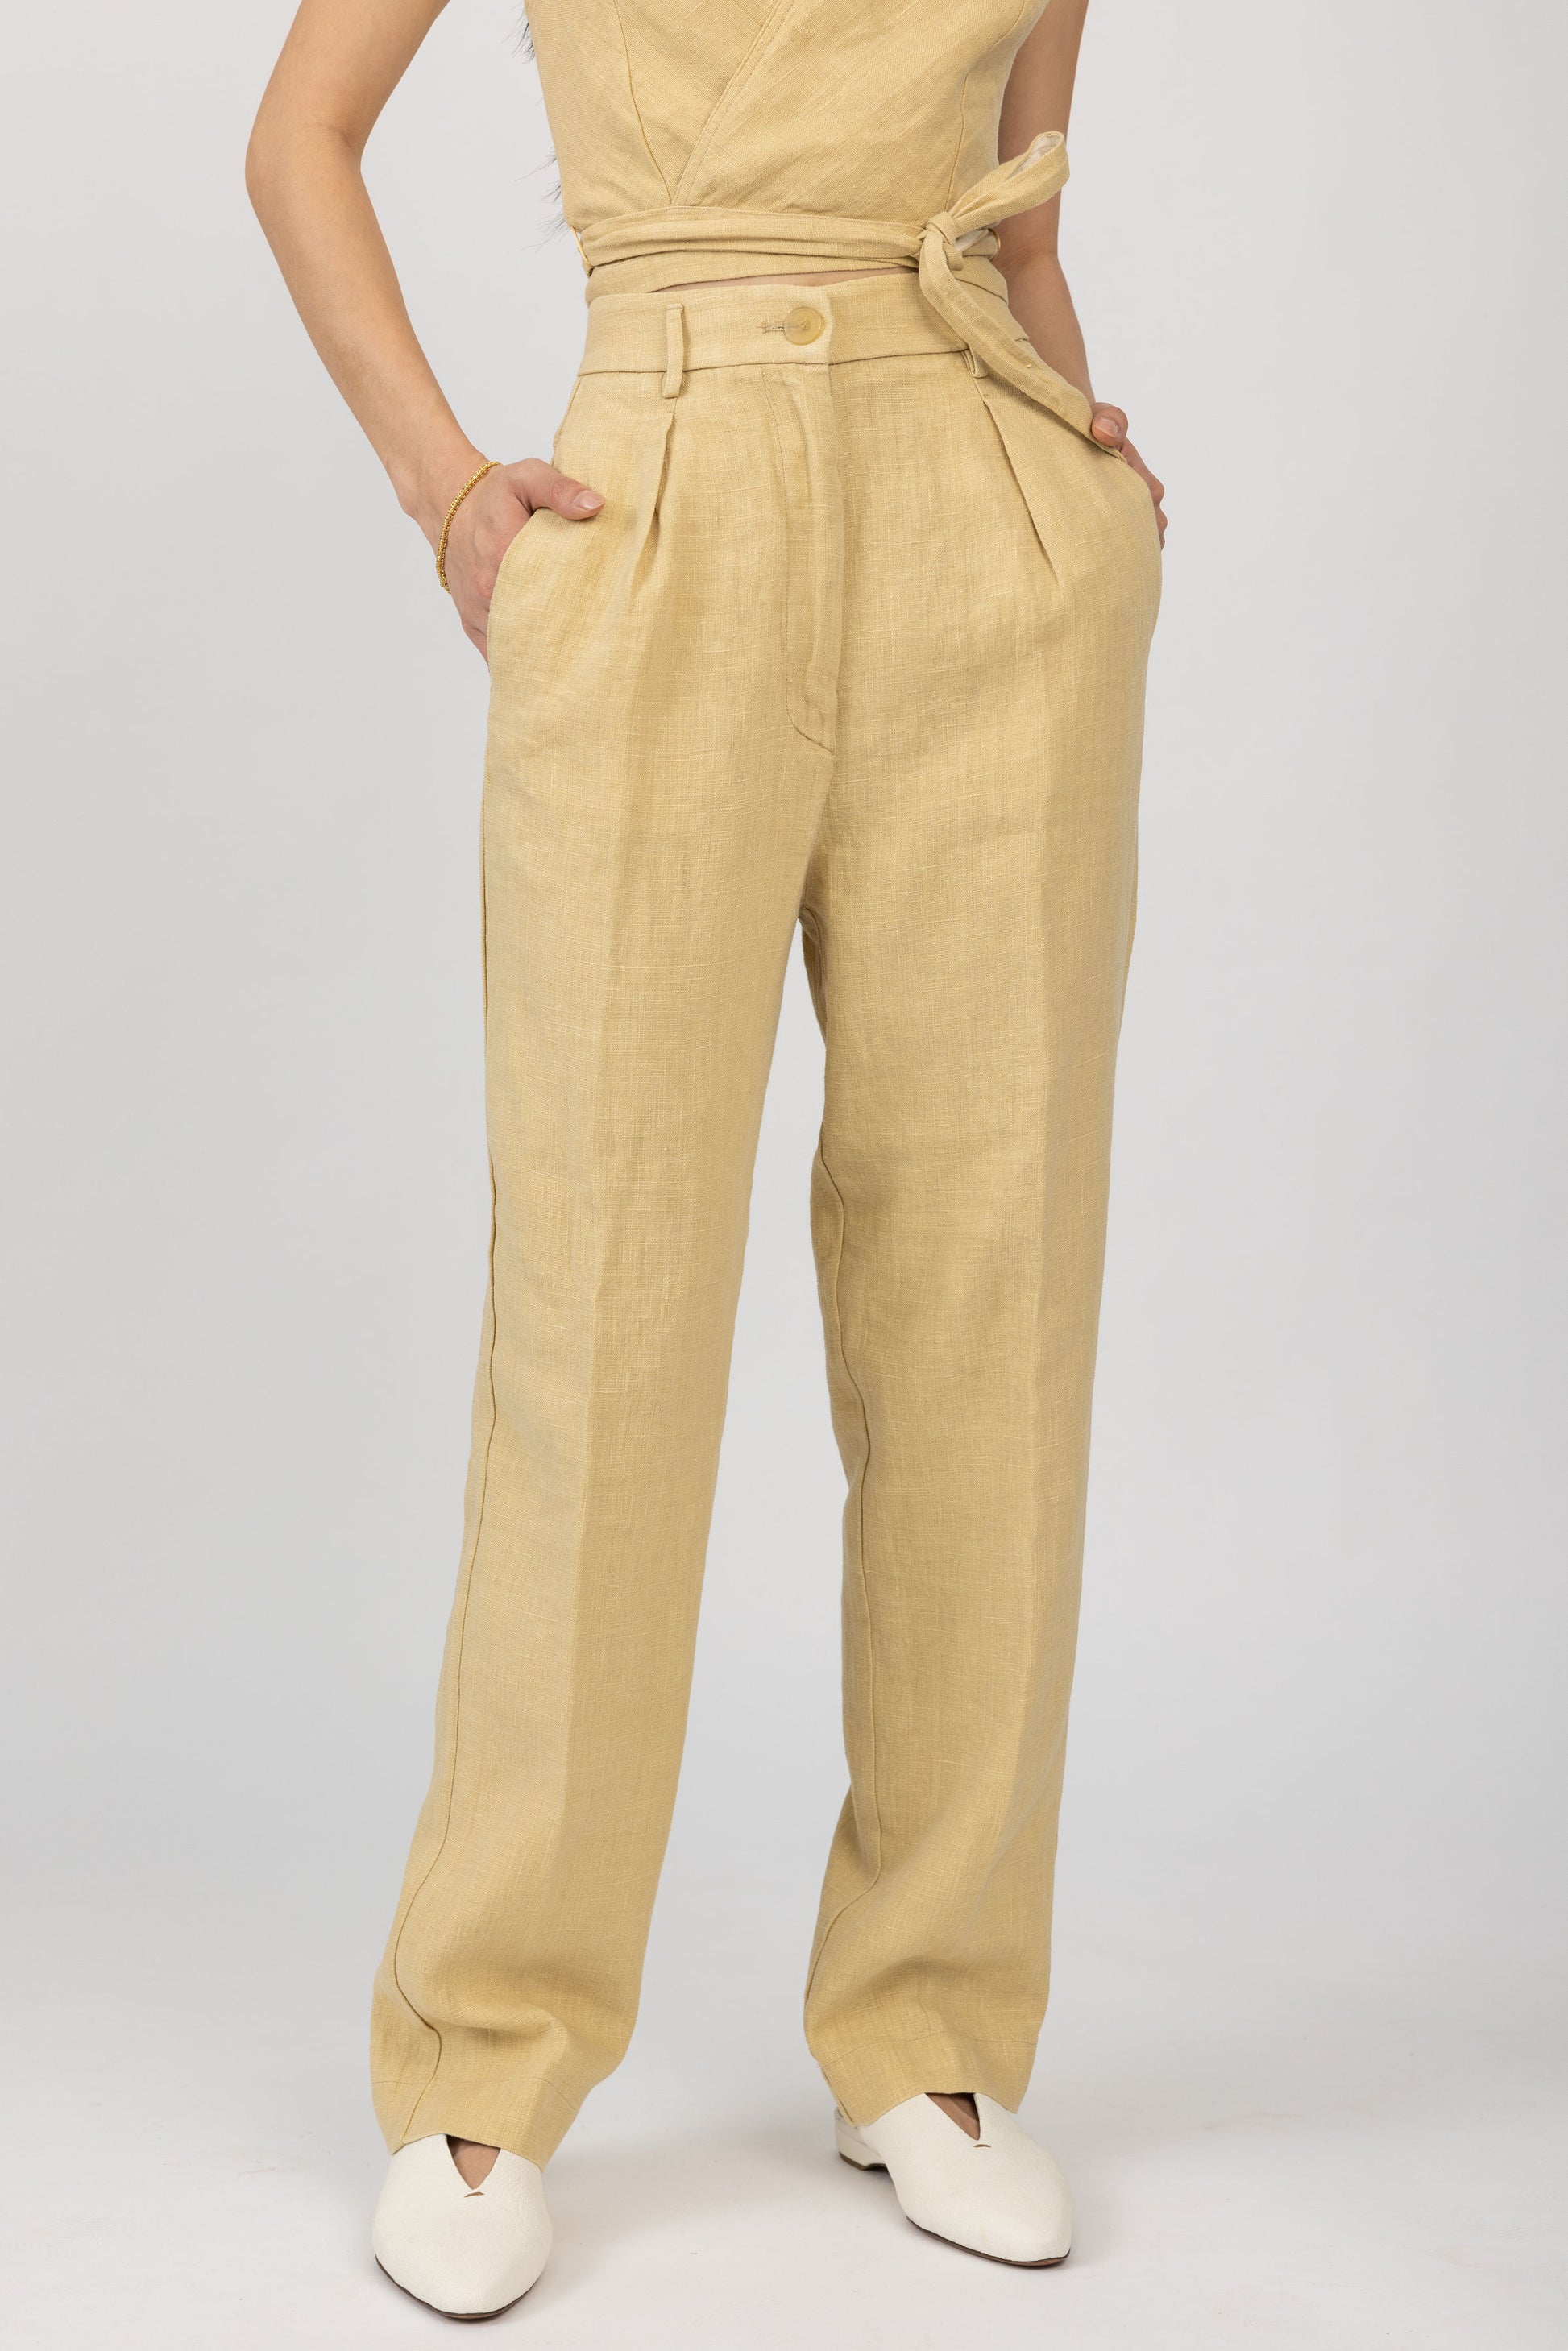 FORTE FORTE Linen Canvas High Waist Pant in Gold